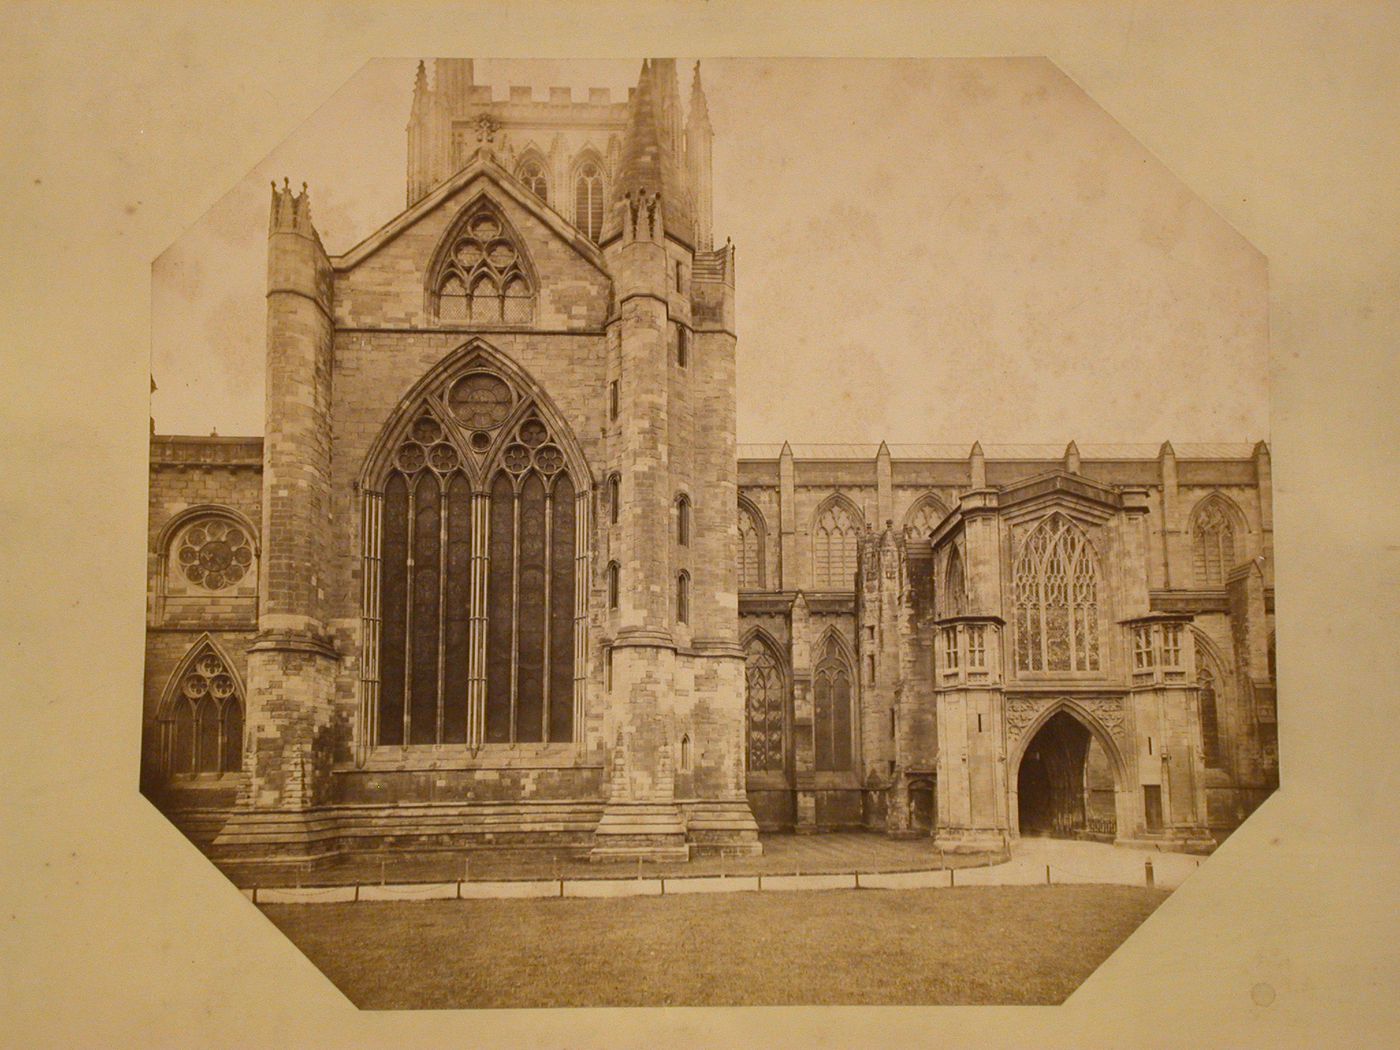 Partial view of Hereford Cathedral showing the entrance, a transept, the nave and the tower, Hereford, England